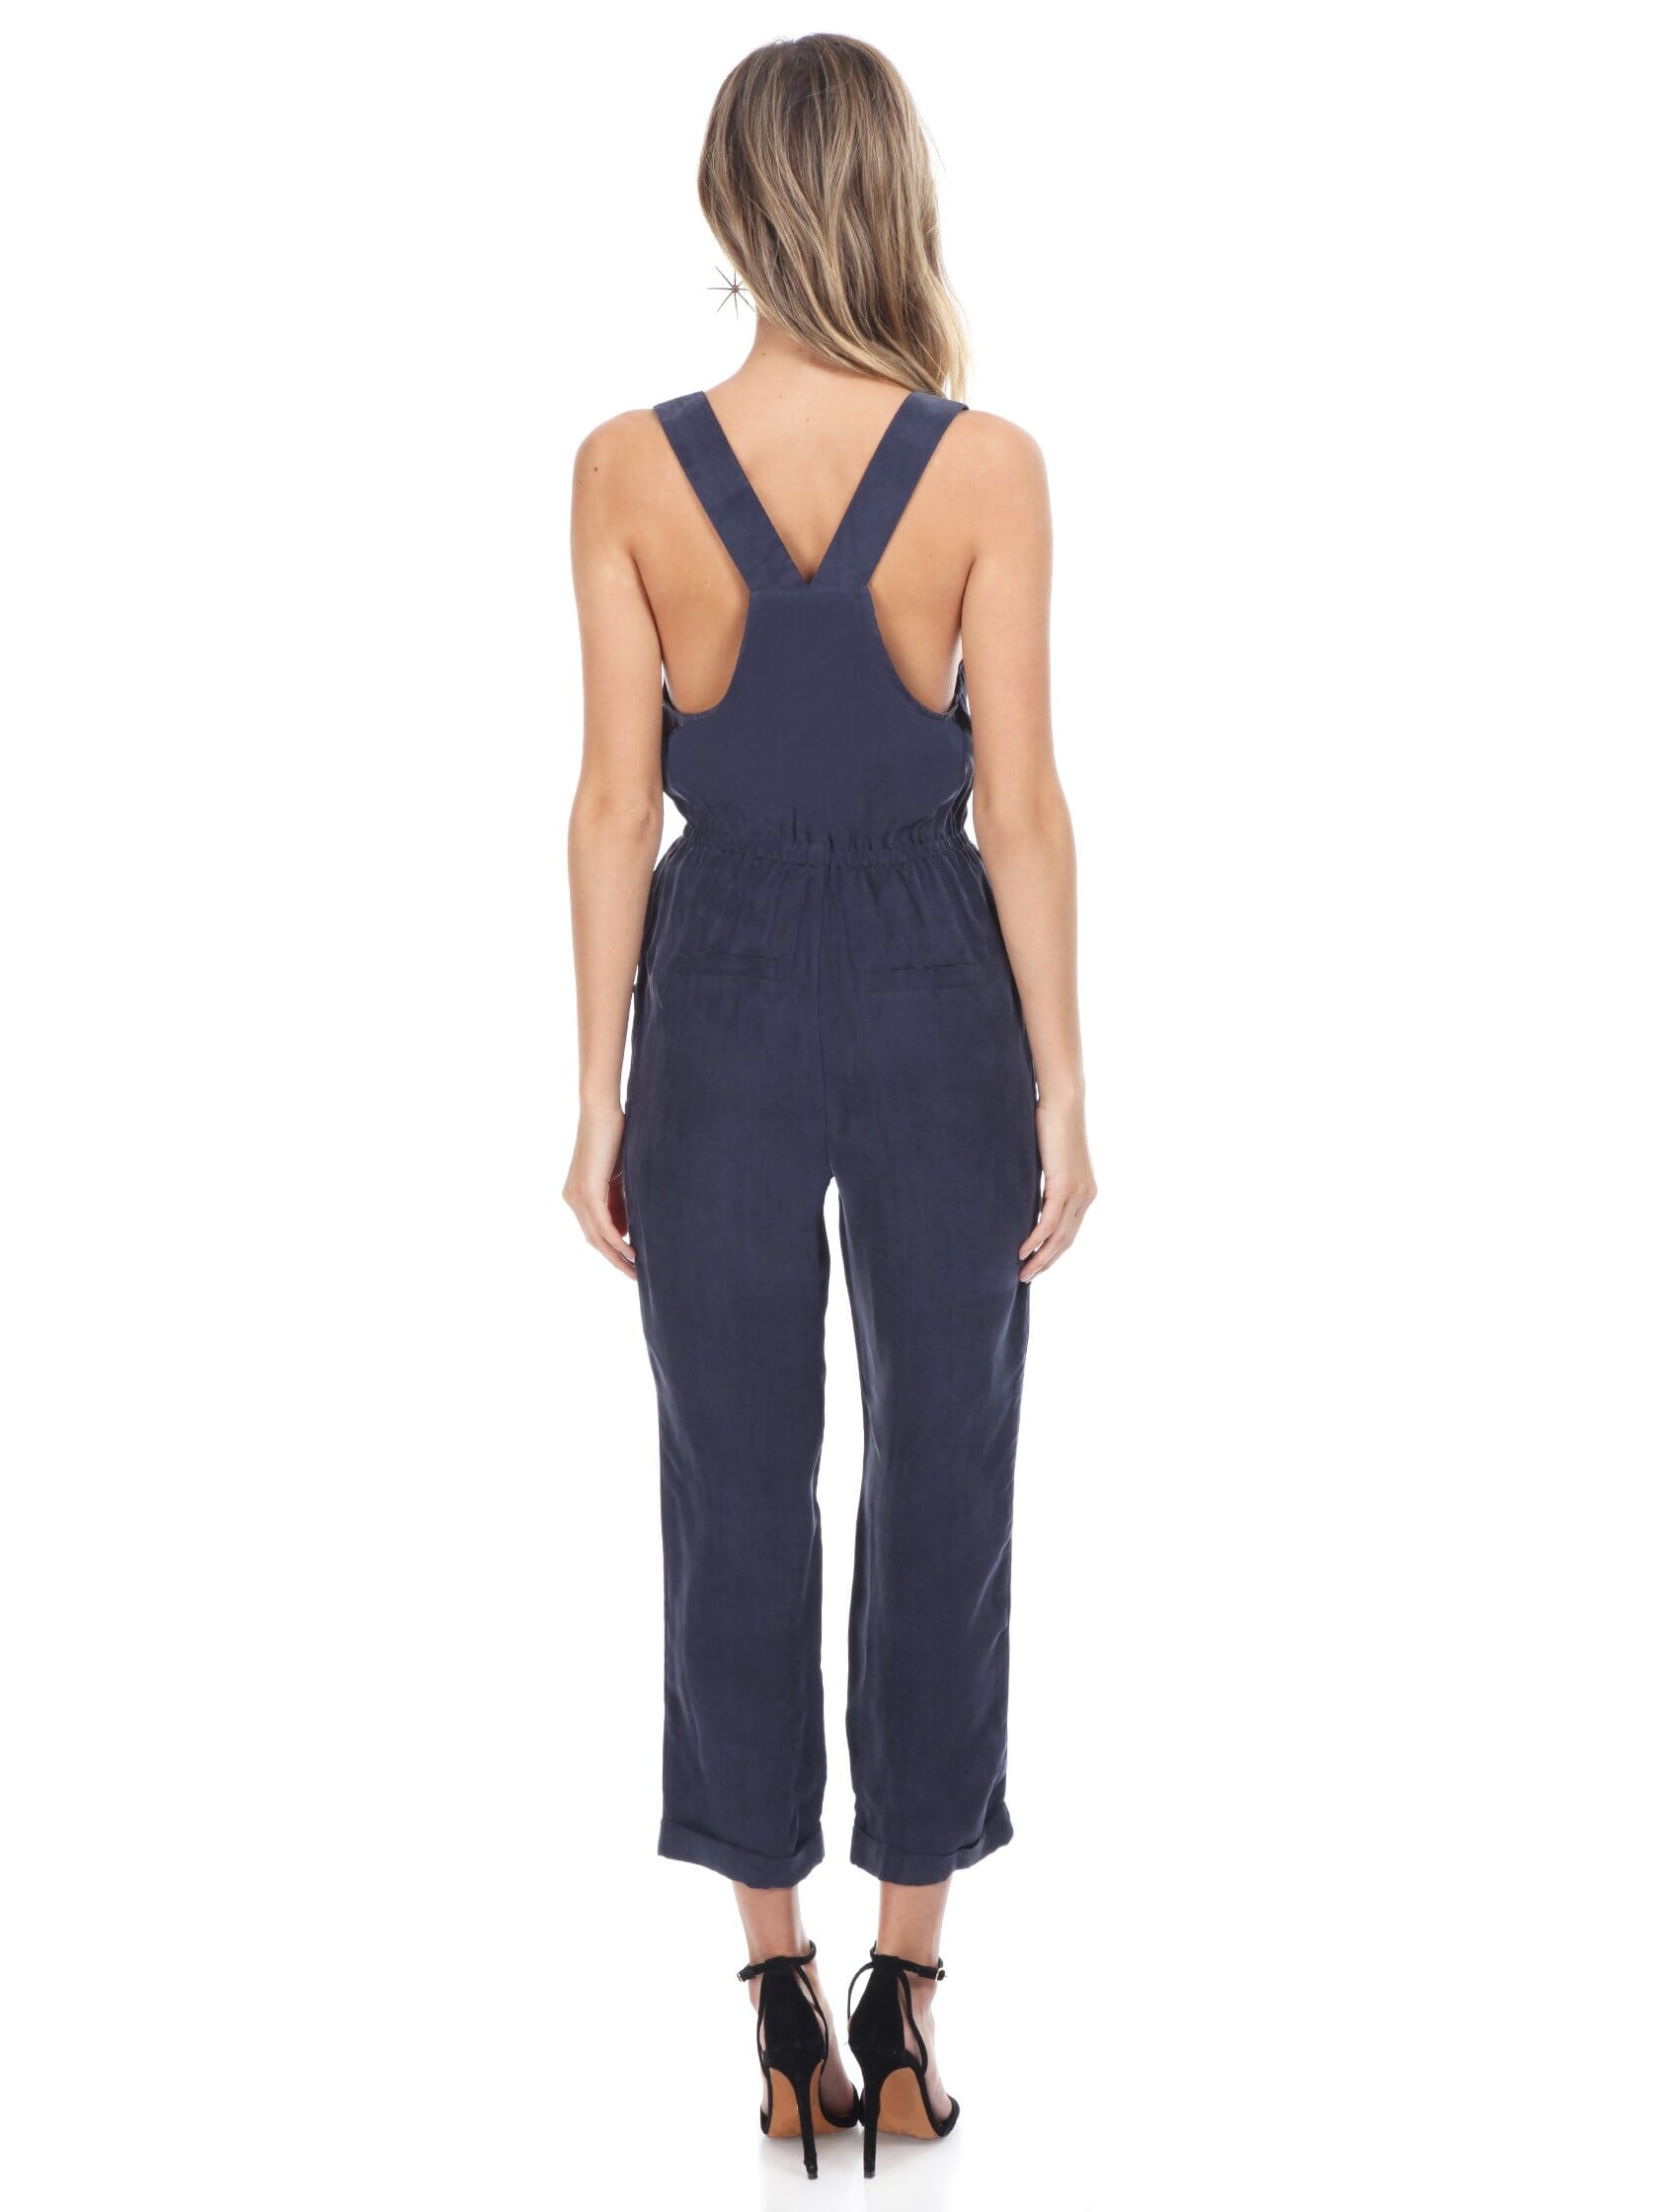 FashionPass Cadie Overall in Navy